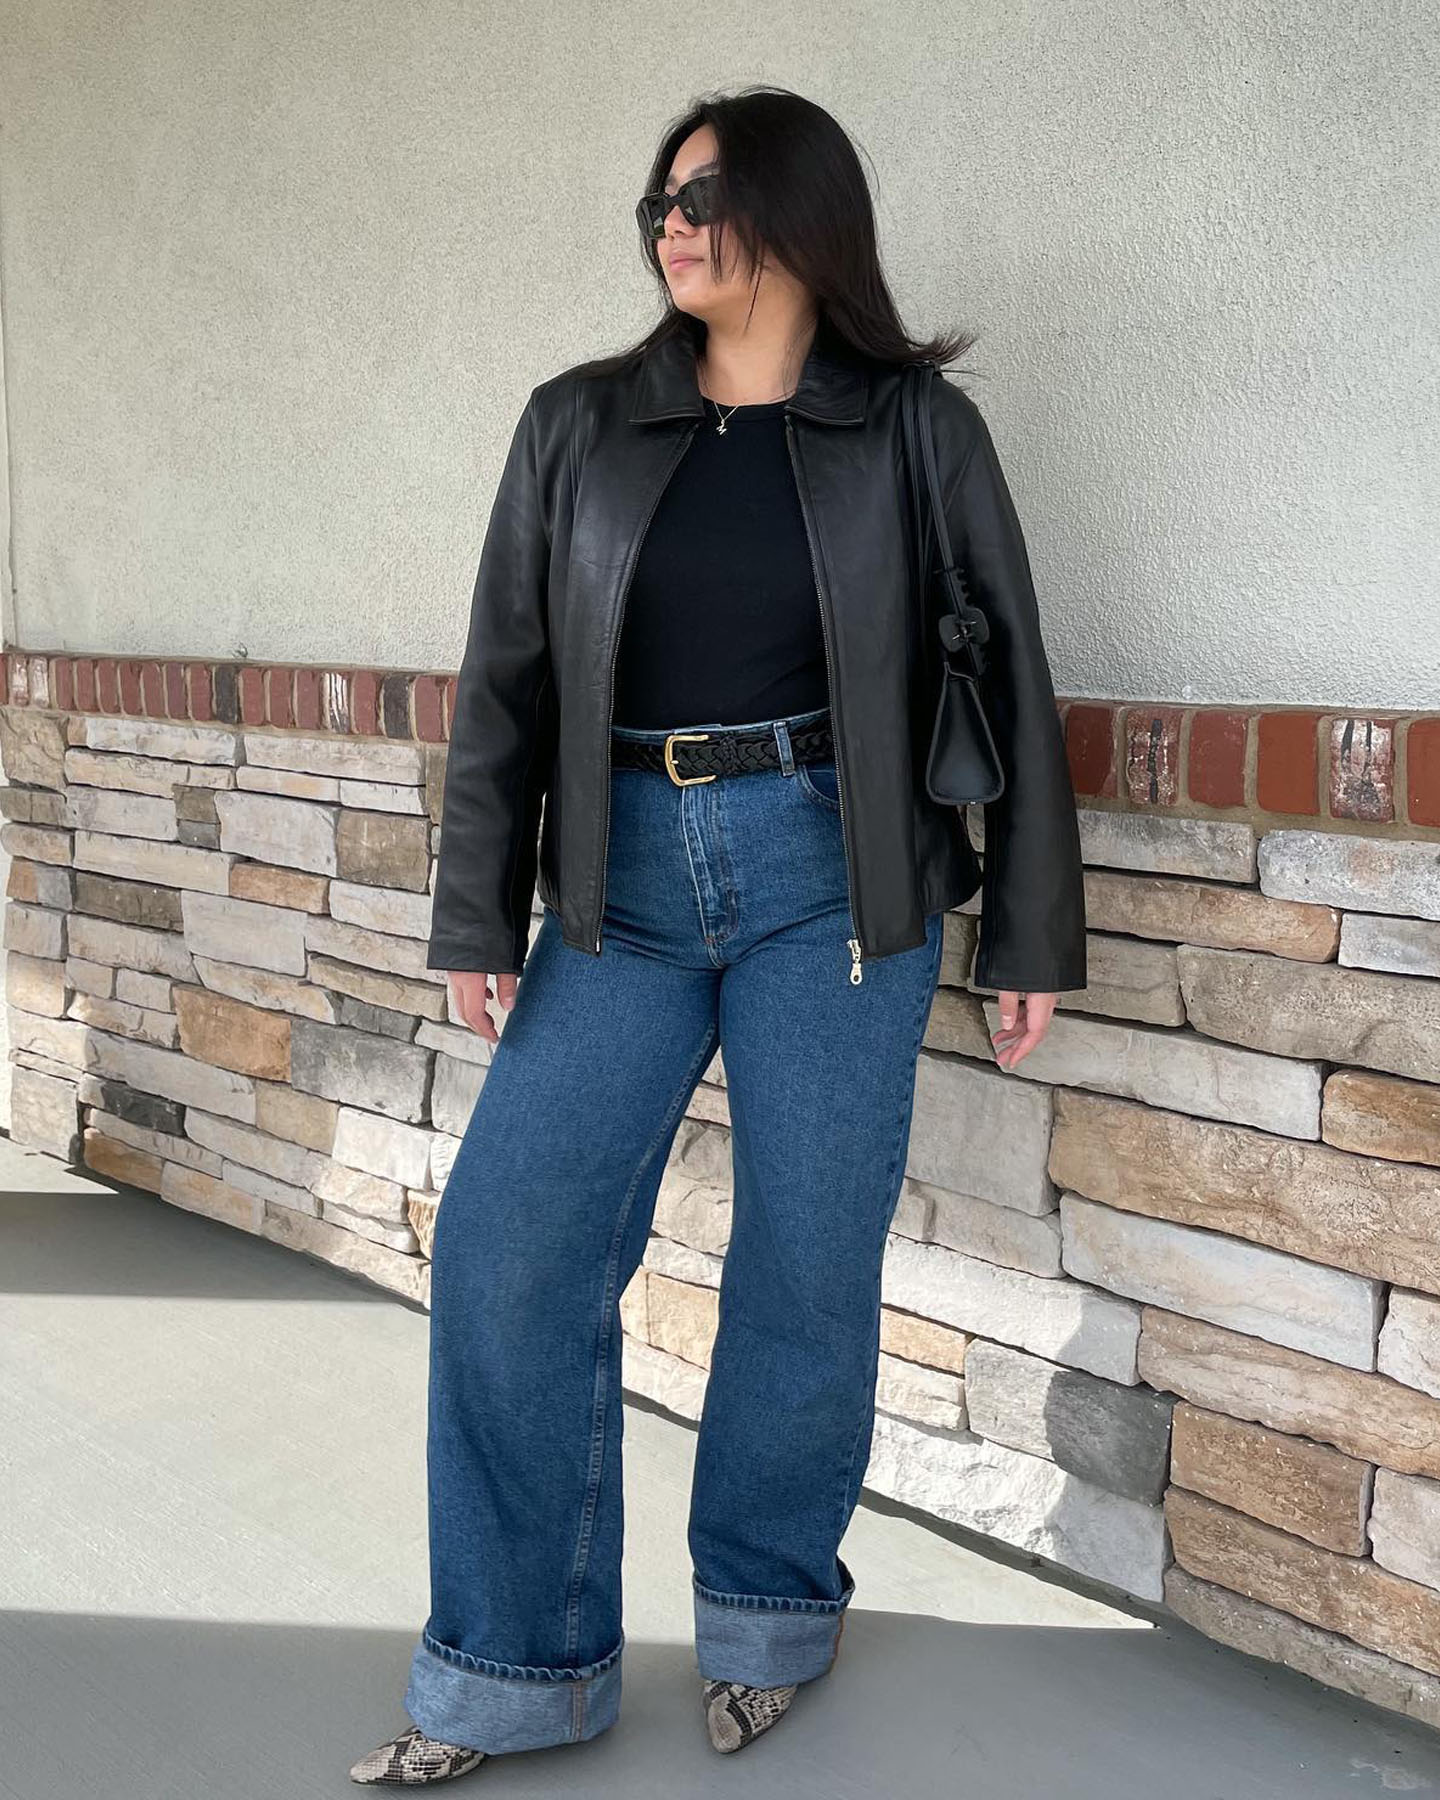 fashion influencer Marina Torres with a classic belt and jeans